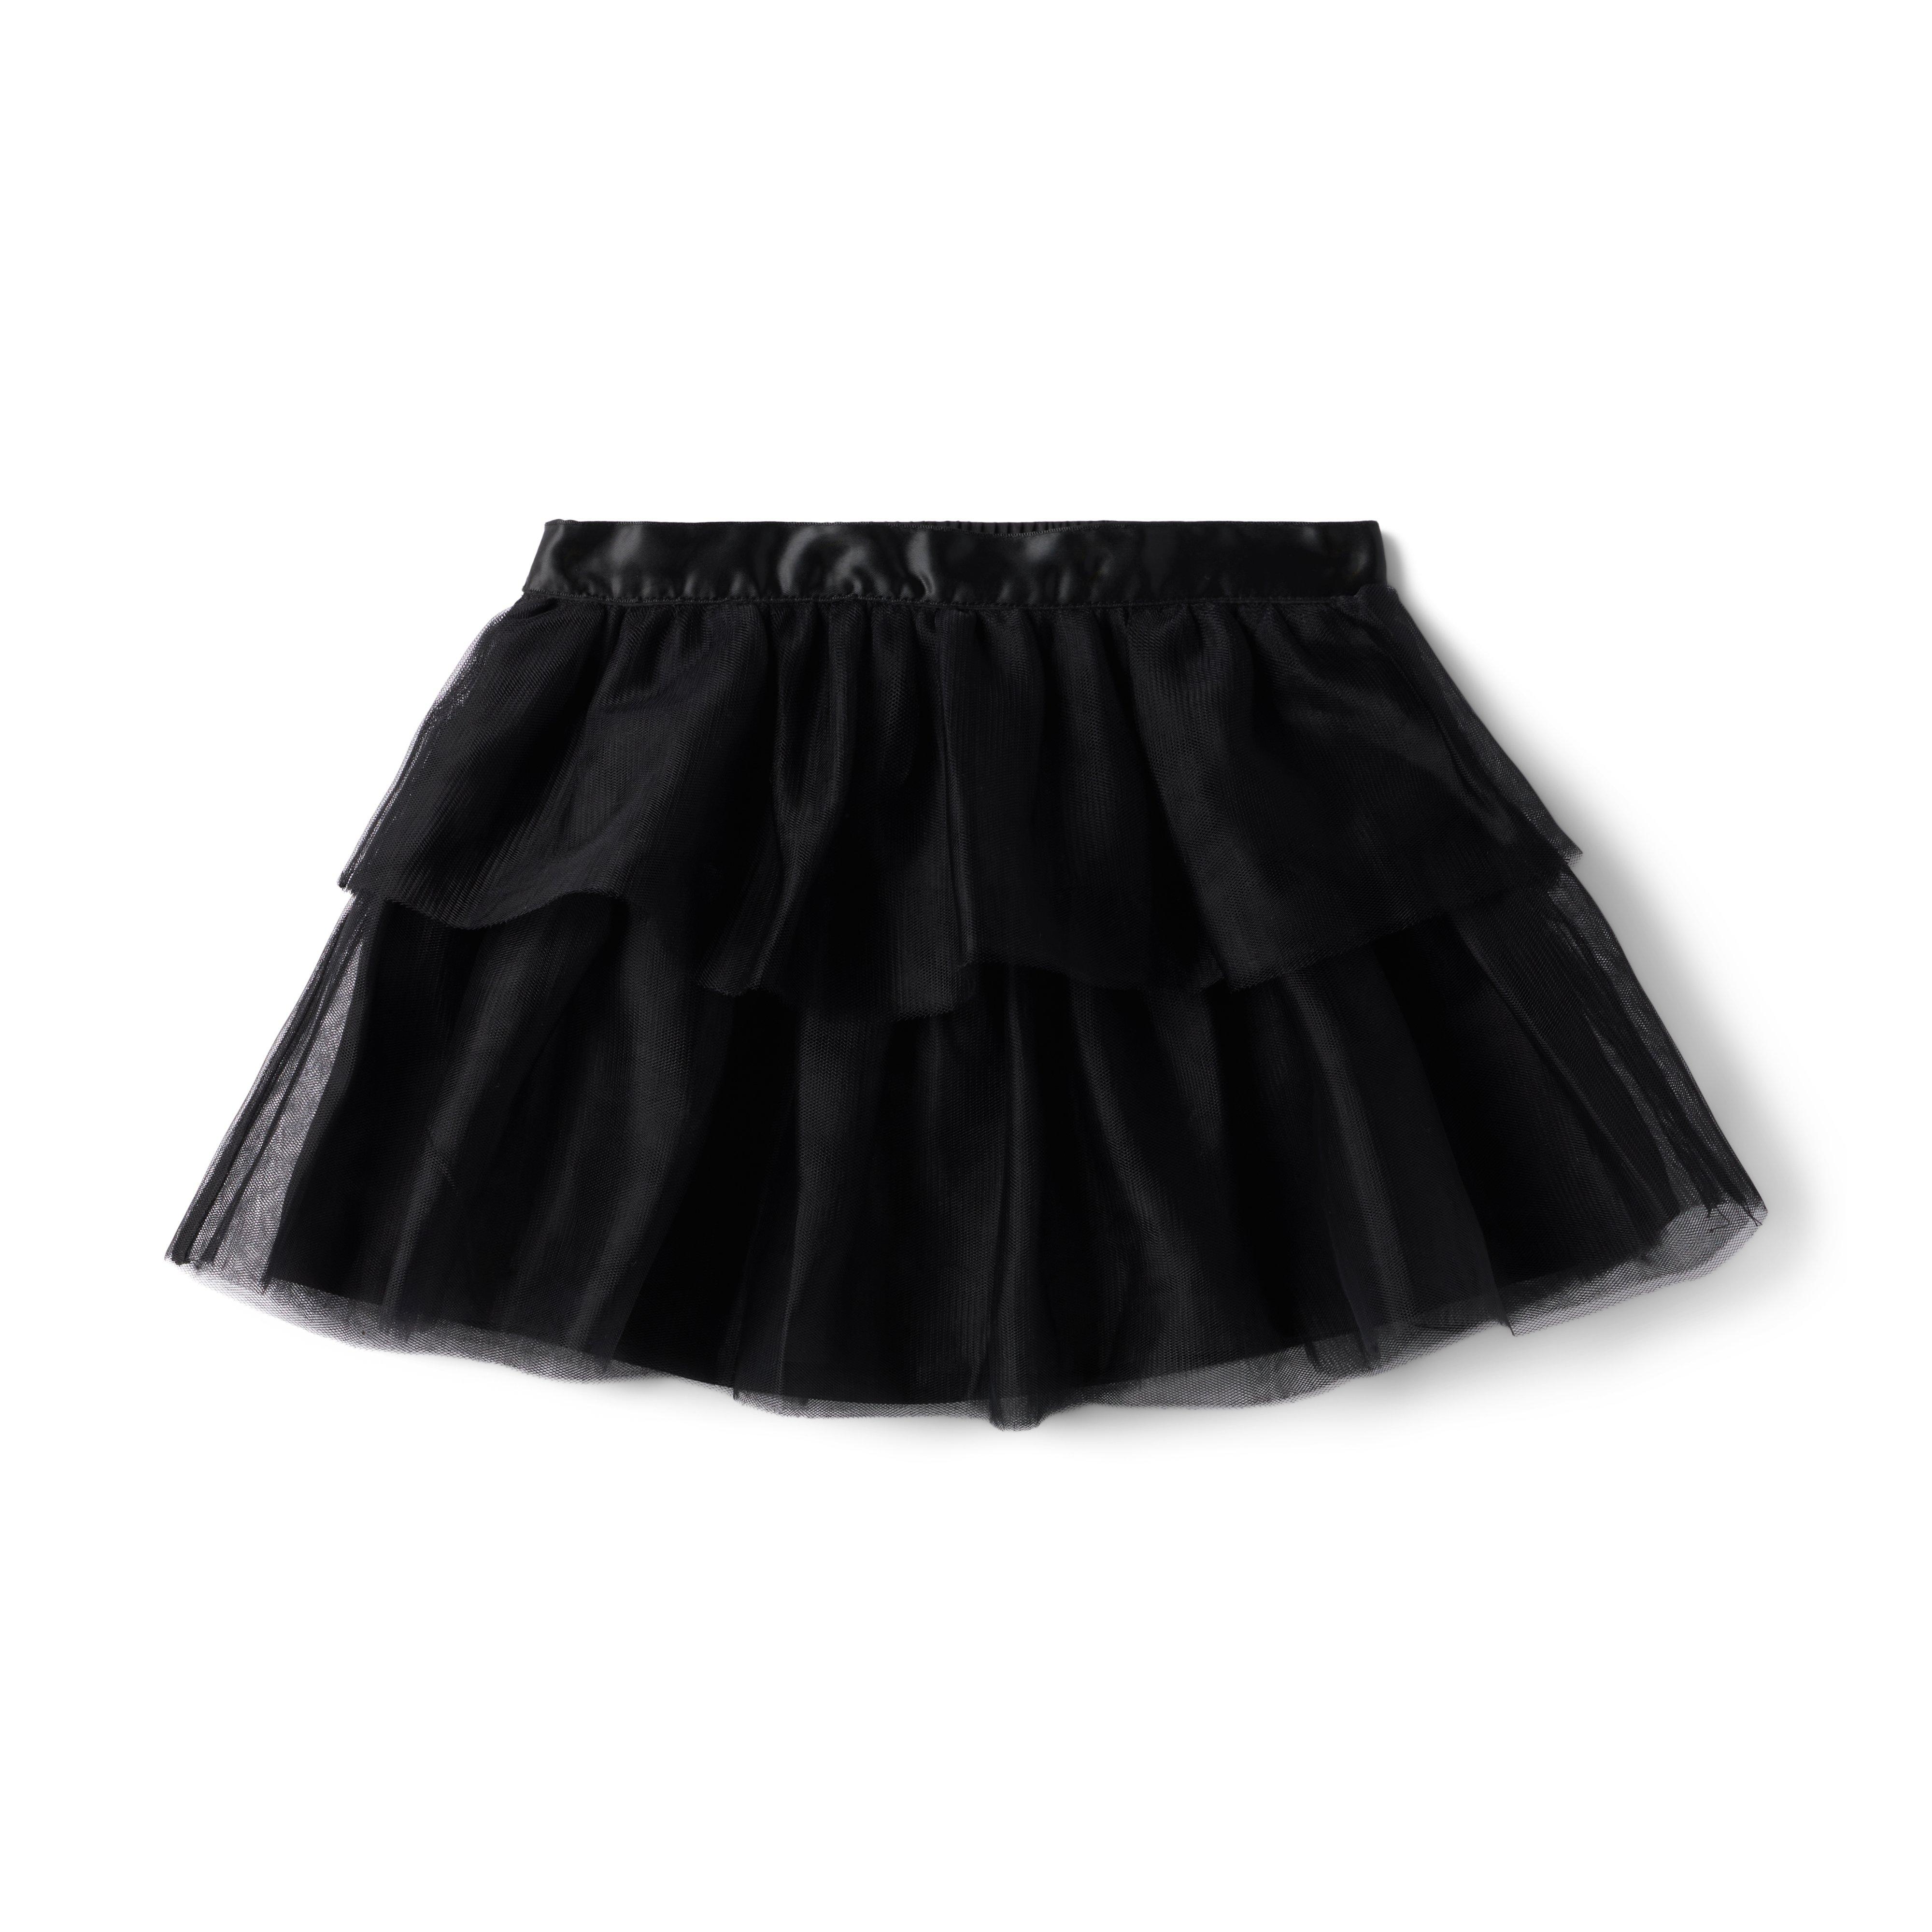 Girl JJ Black Tiered Tulle Skirt by Janie and Jack